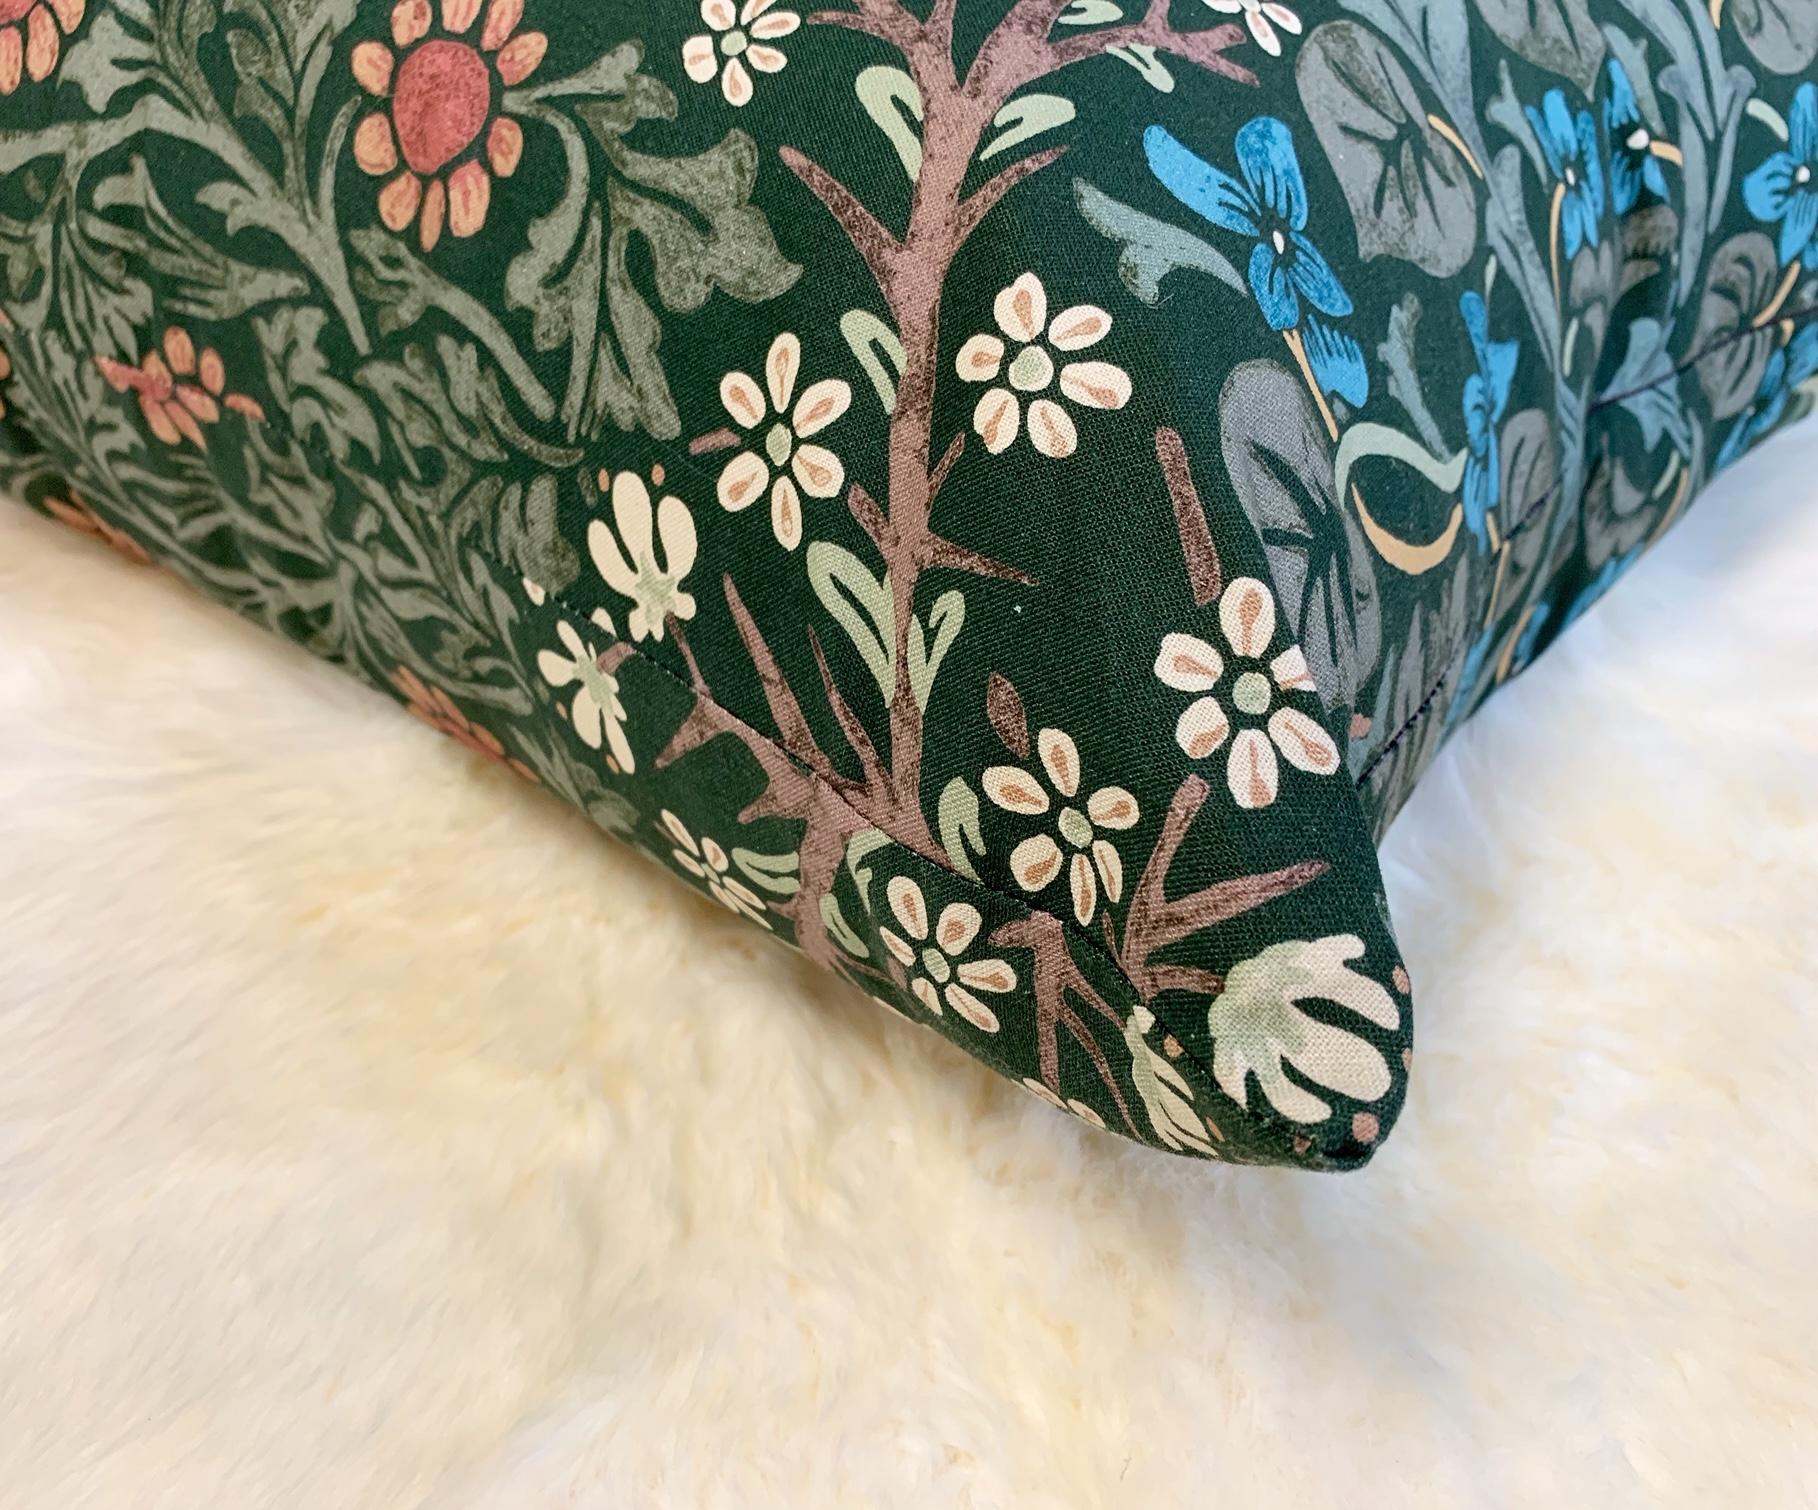 Beautiful pillow crafted in our Saint Louis studio. William Morris Blackthorn is a lovely dark green floral. We adore it! Down feather insert included.